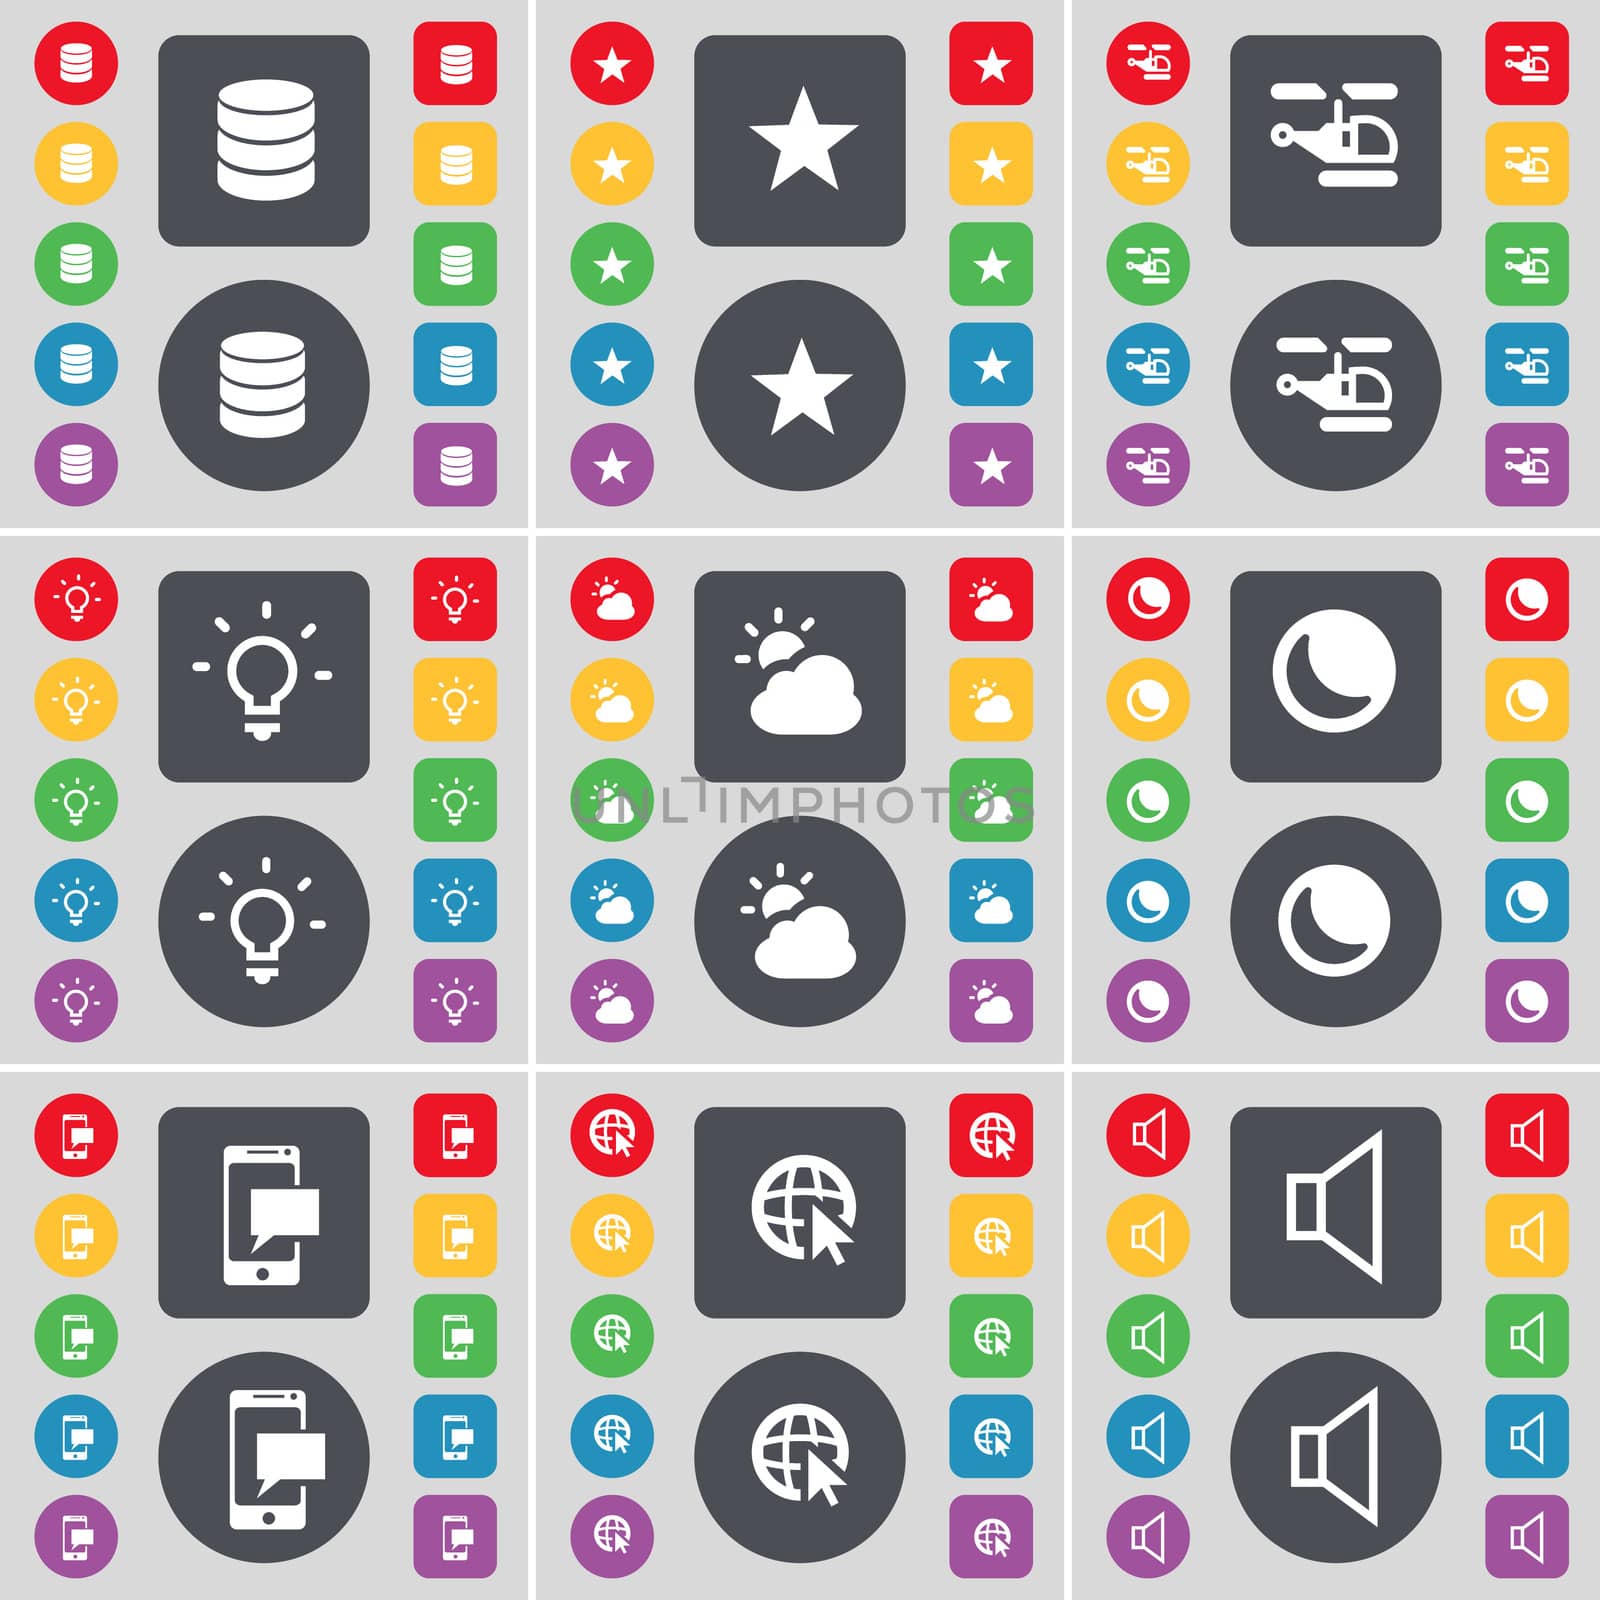 Database, Star, Helicopter, Light bulb, Cloud, Moon, SMS, Web cursor, Sound icon symbol. A large set of flat, colored buttons for your design. illustration